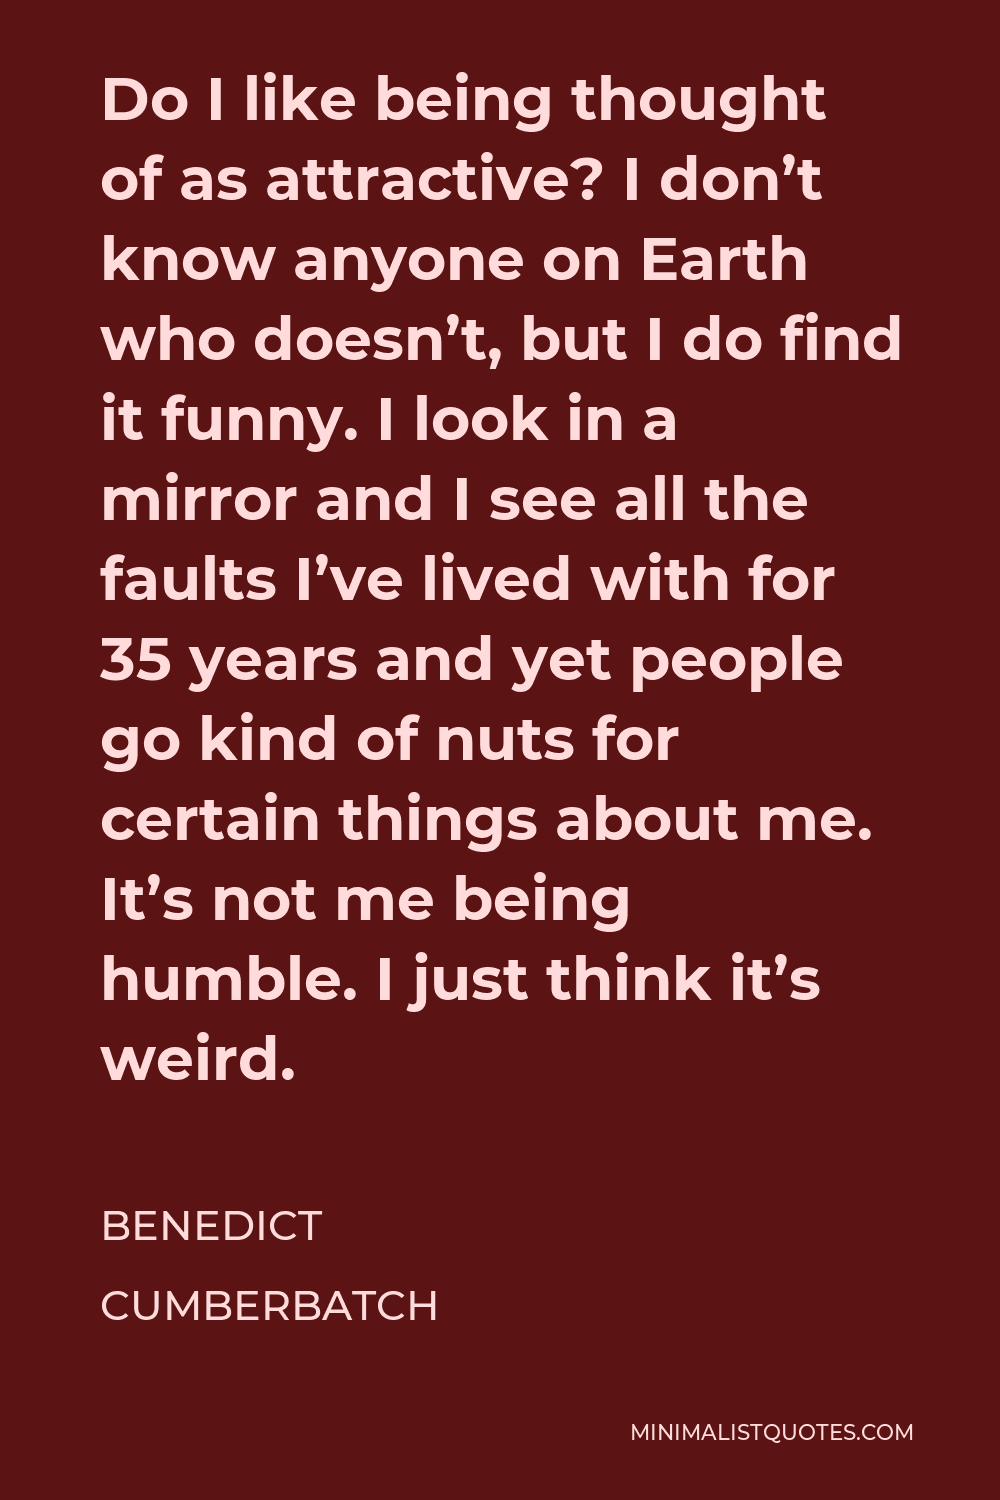 Benedict Cumberbatch Quote - Do I like being thought of as attractive? I don’t know anyone on Earth who doesn’t, but I do find it funny.